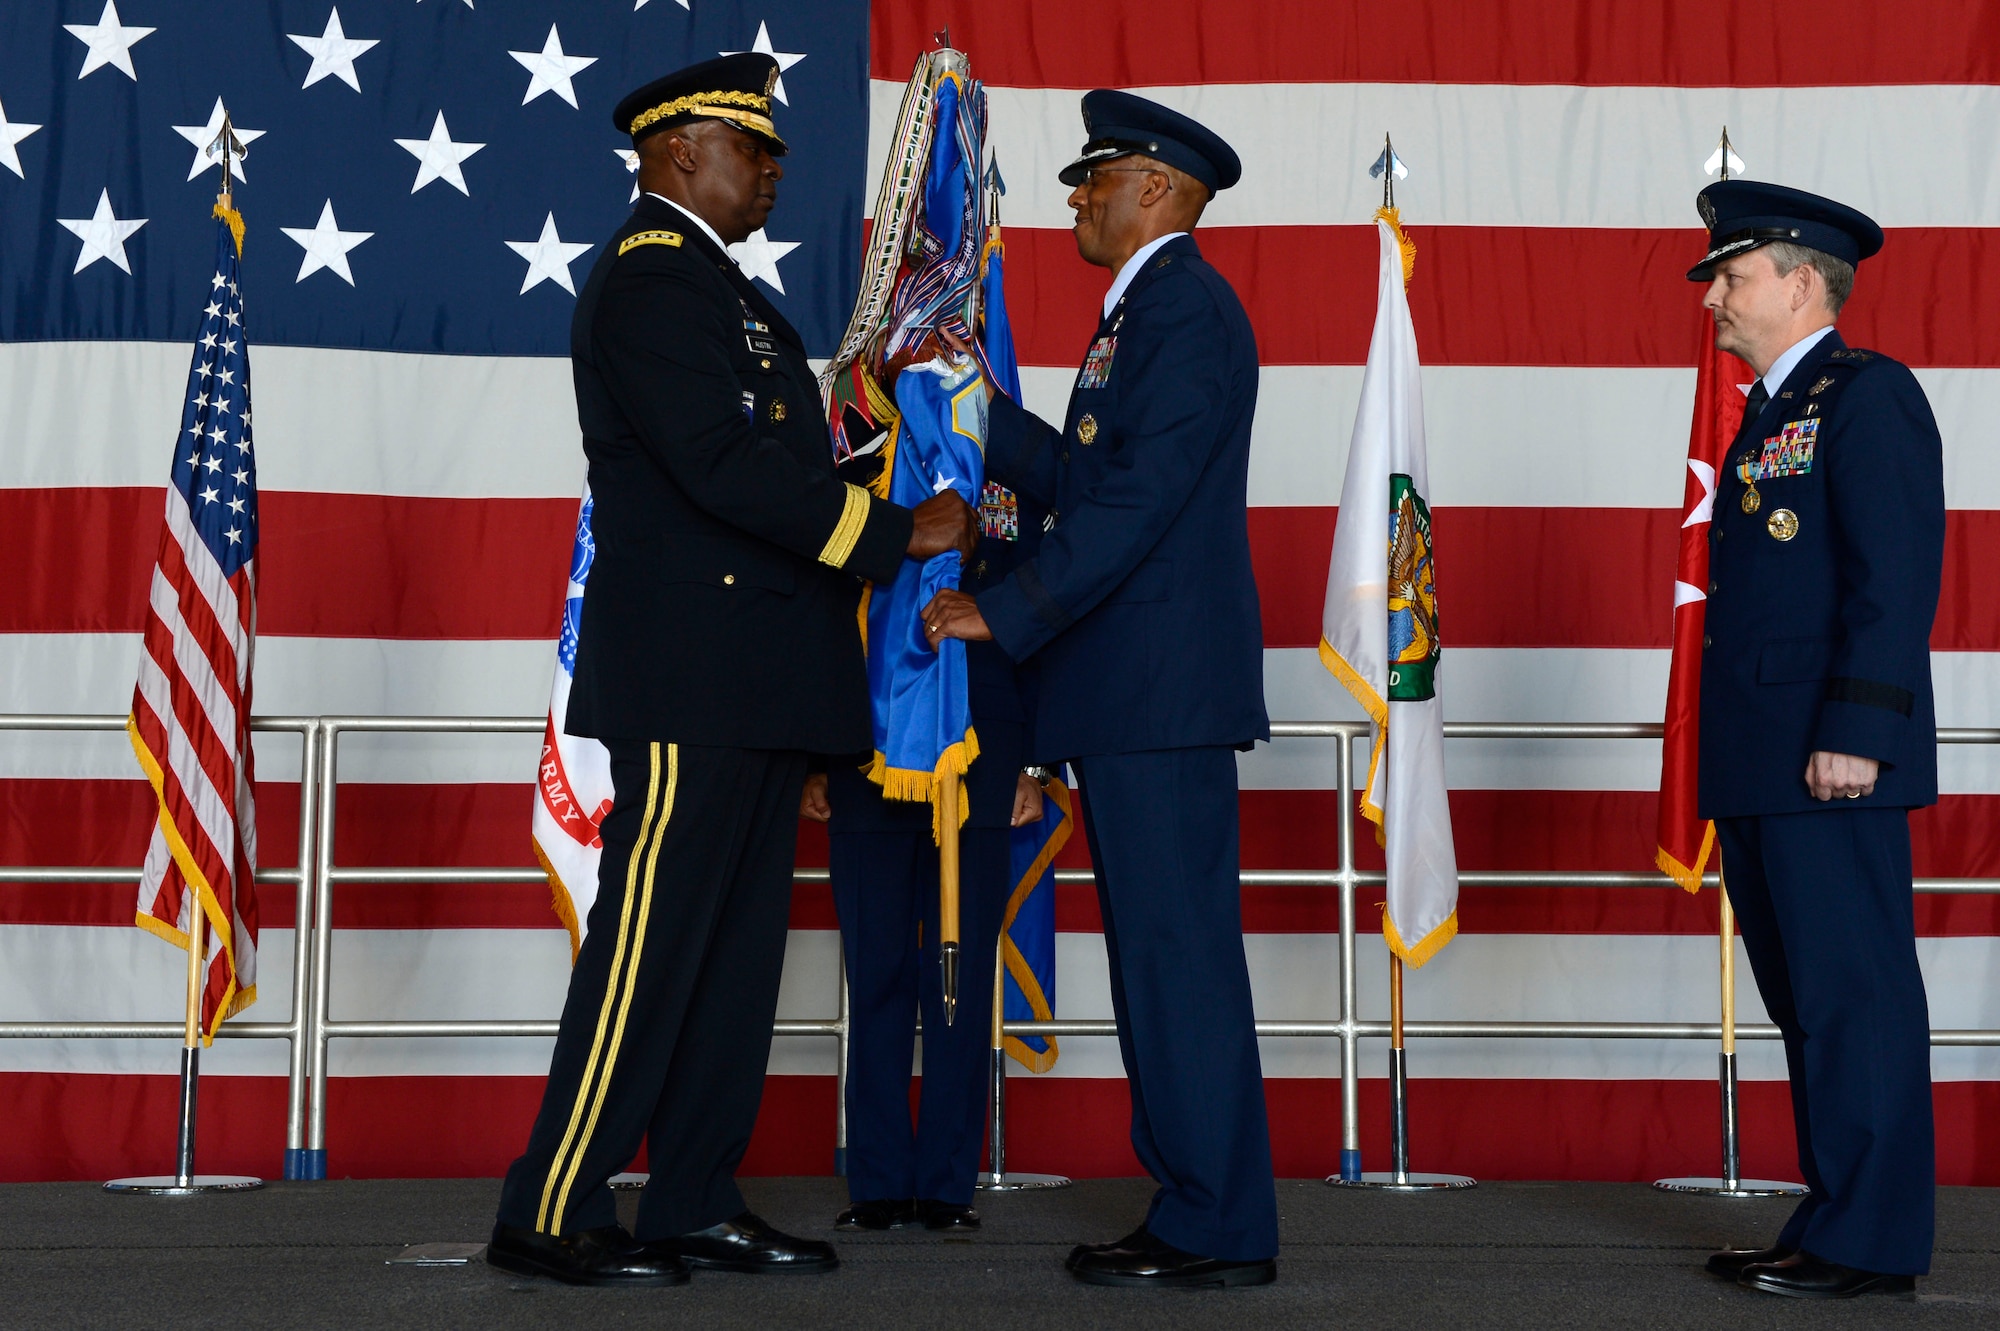 U.S. Air Force Lt. Gen. Charles Q. Brown Jr., U.S. Air Forces Central Command commander, receives the USAFCENT guidon from U.S. Army Gen. Lloyd J. Austin III, U.S. Central Command commander, during a change of command ceremony at Shaw Air Force Base, S.C., June 29, 2015. Outgoing and incoming commanders exchange a unit’s guidon to symbolize relinquishment and assumption of command. (U.S. Air Force photo by Senior Airman Jensen Stidham/Released)